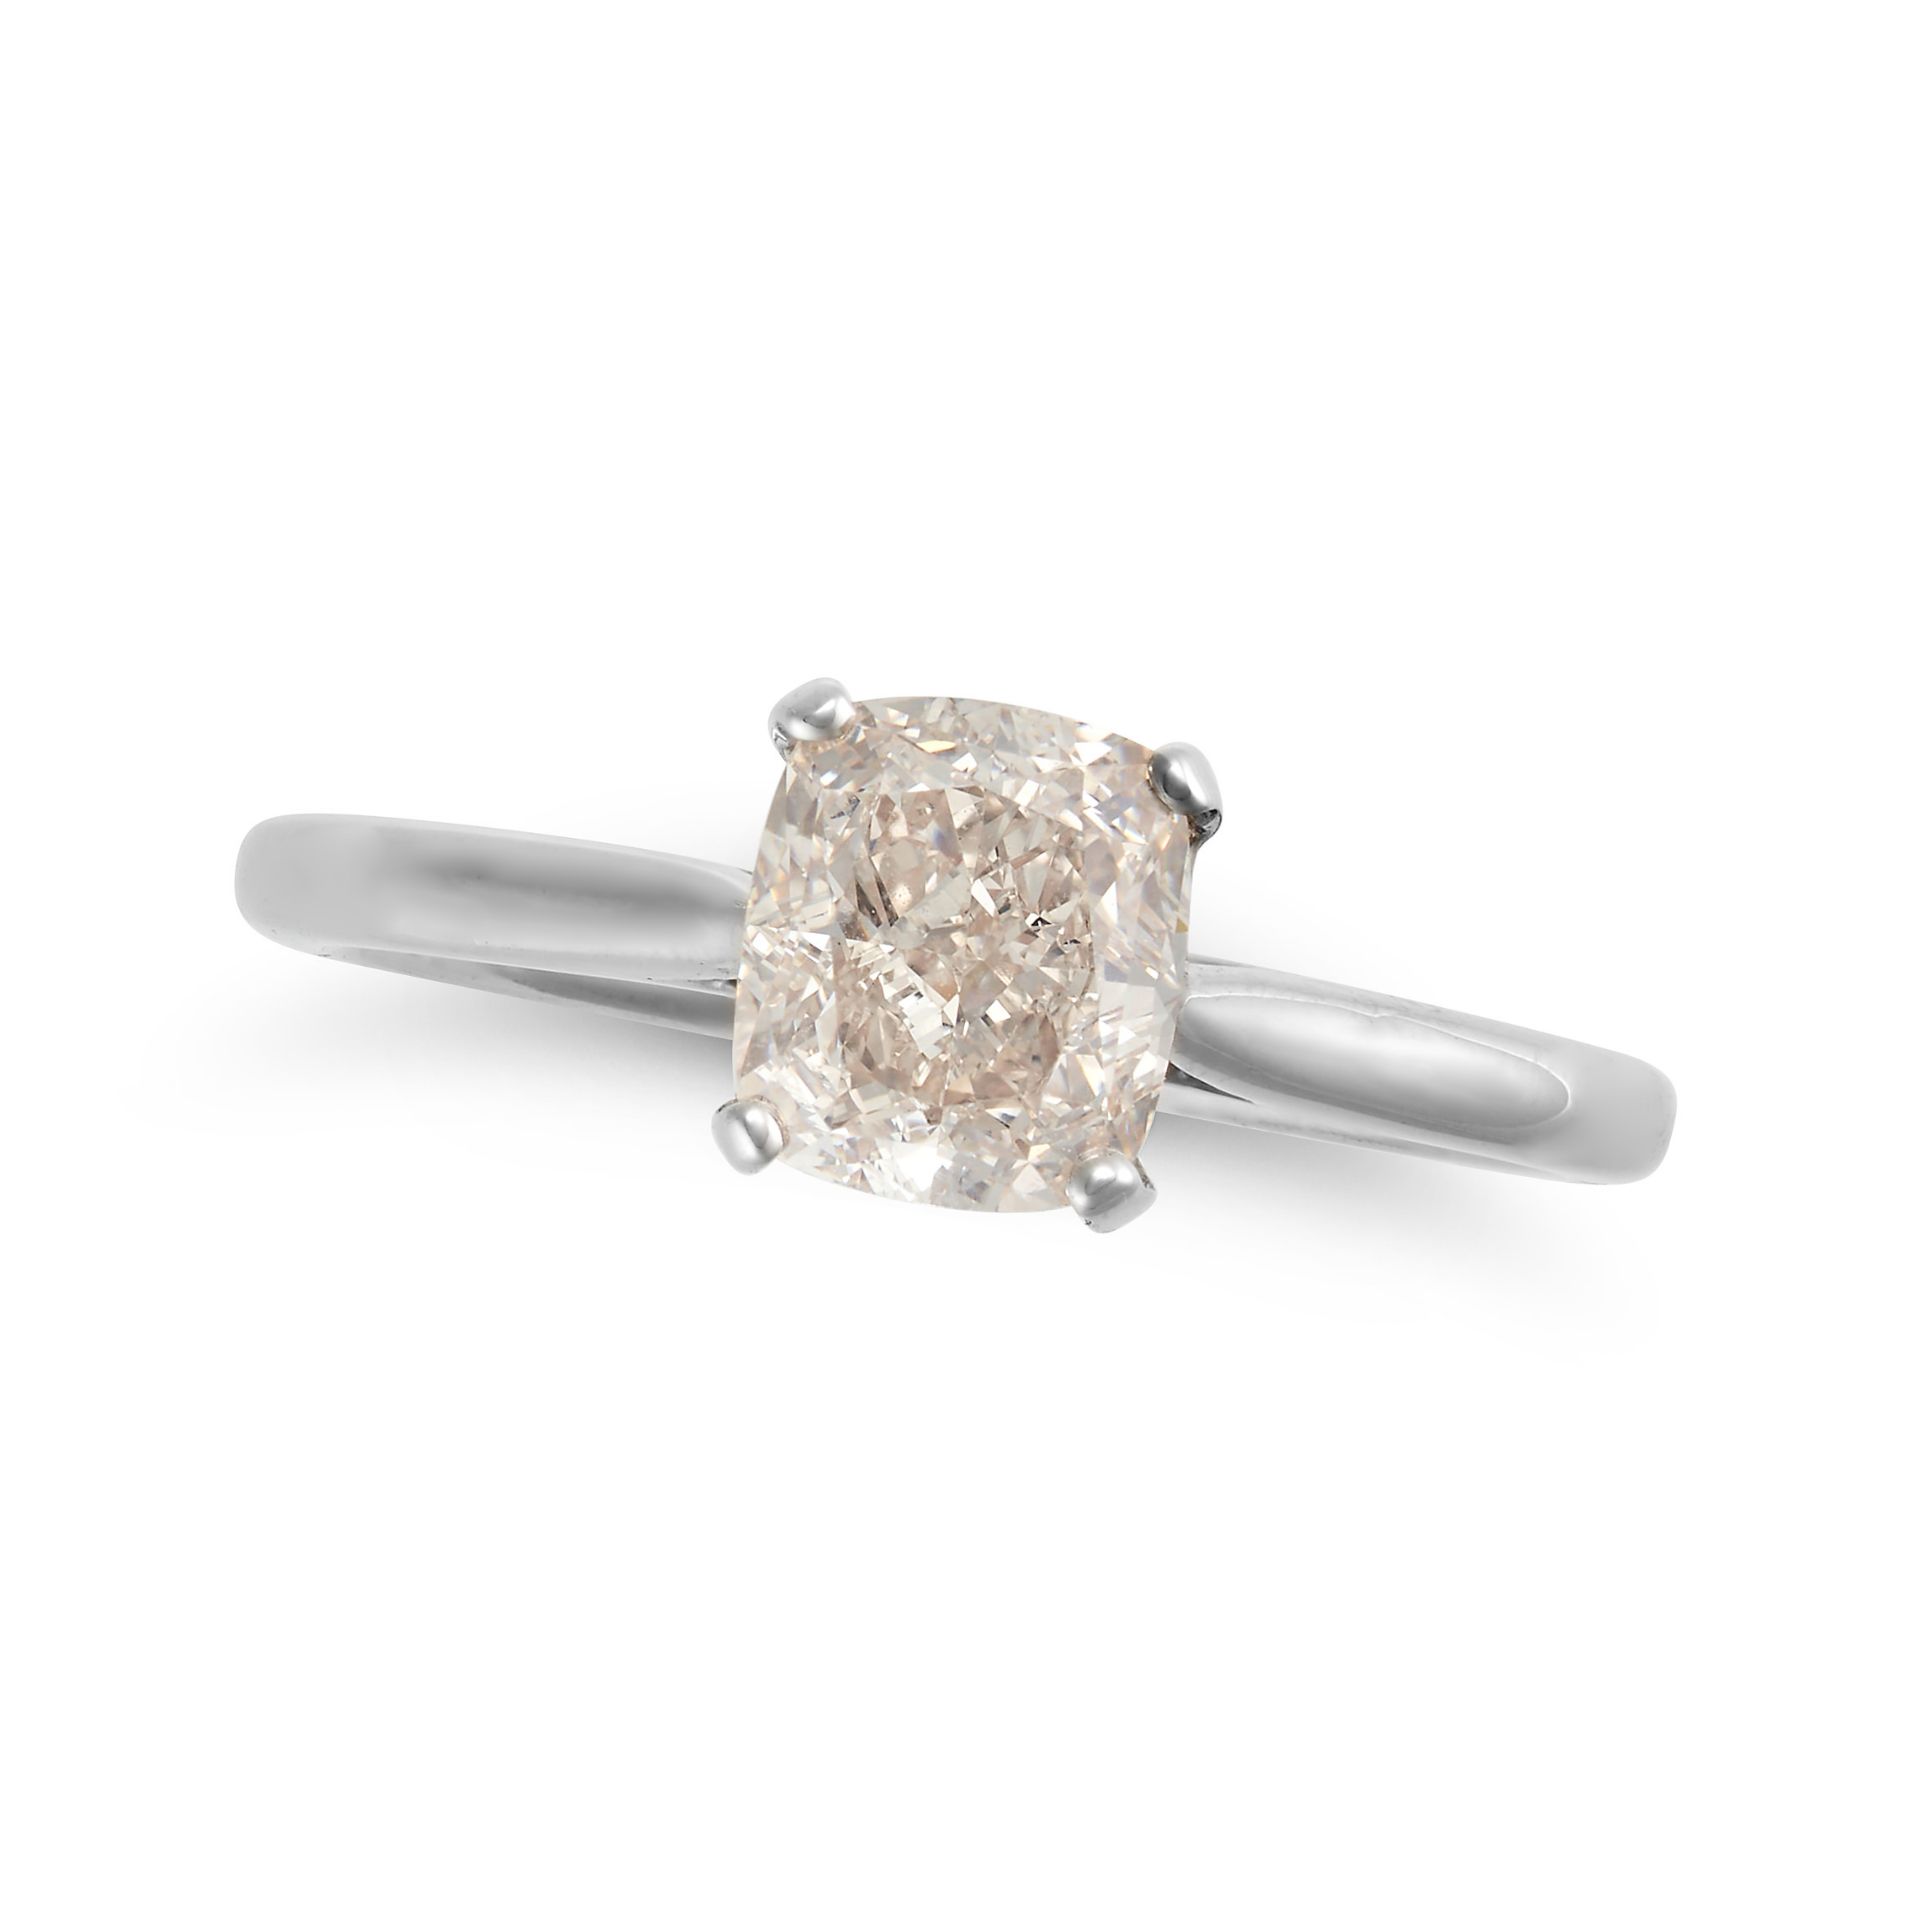 A SOLITAIRE DIAMOND RING in 18ct white gold, set with a radiant cut diamond of 1.53 carats, parti...